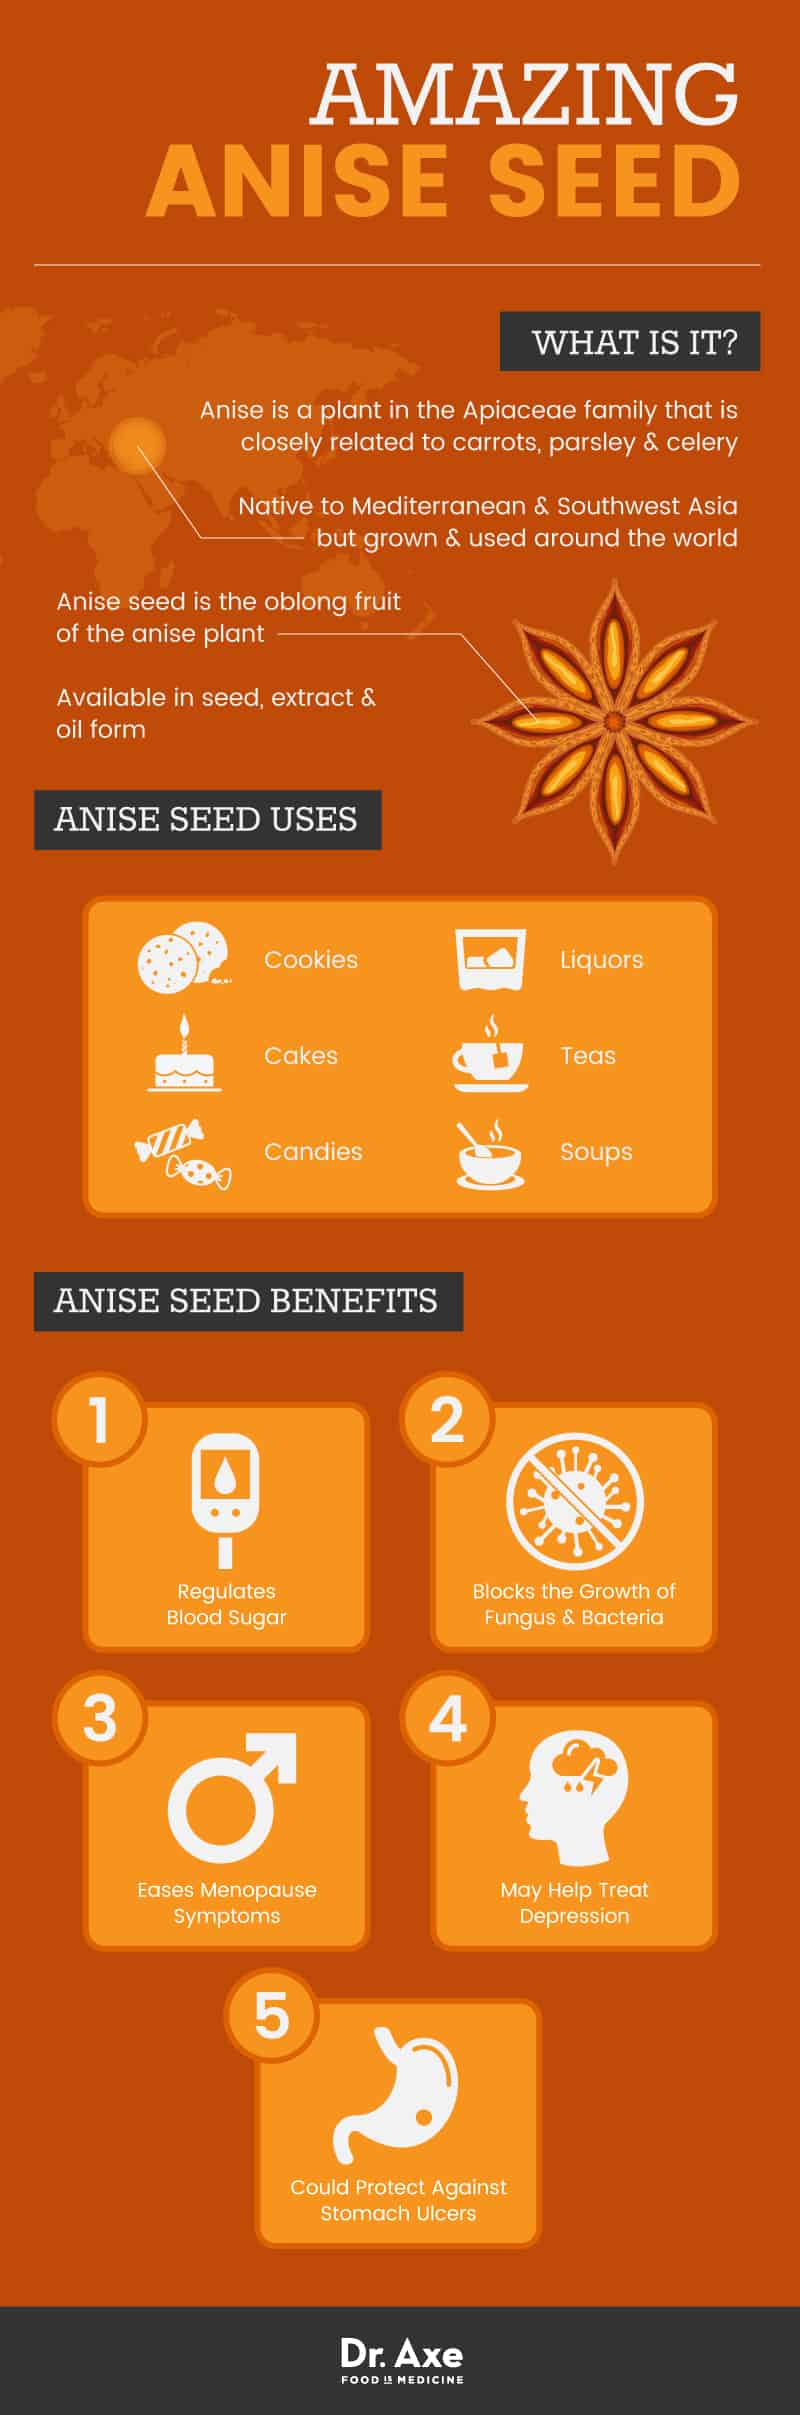 Anise seed - Dr. Axe